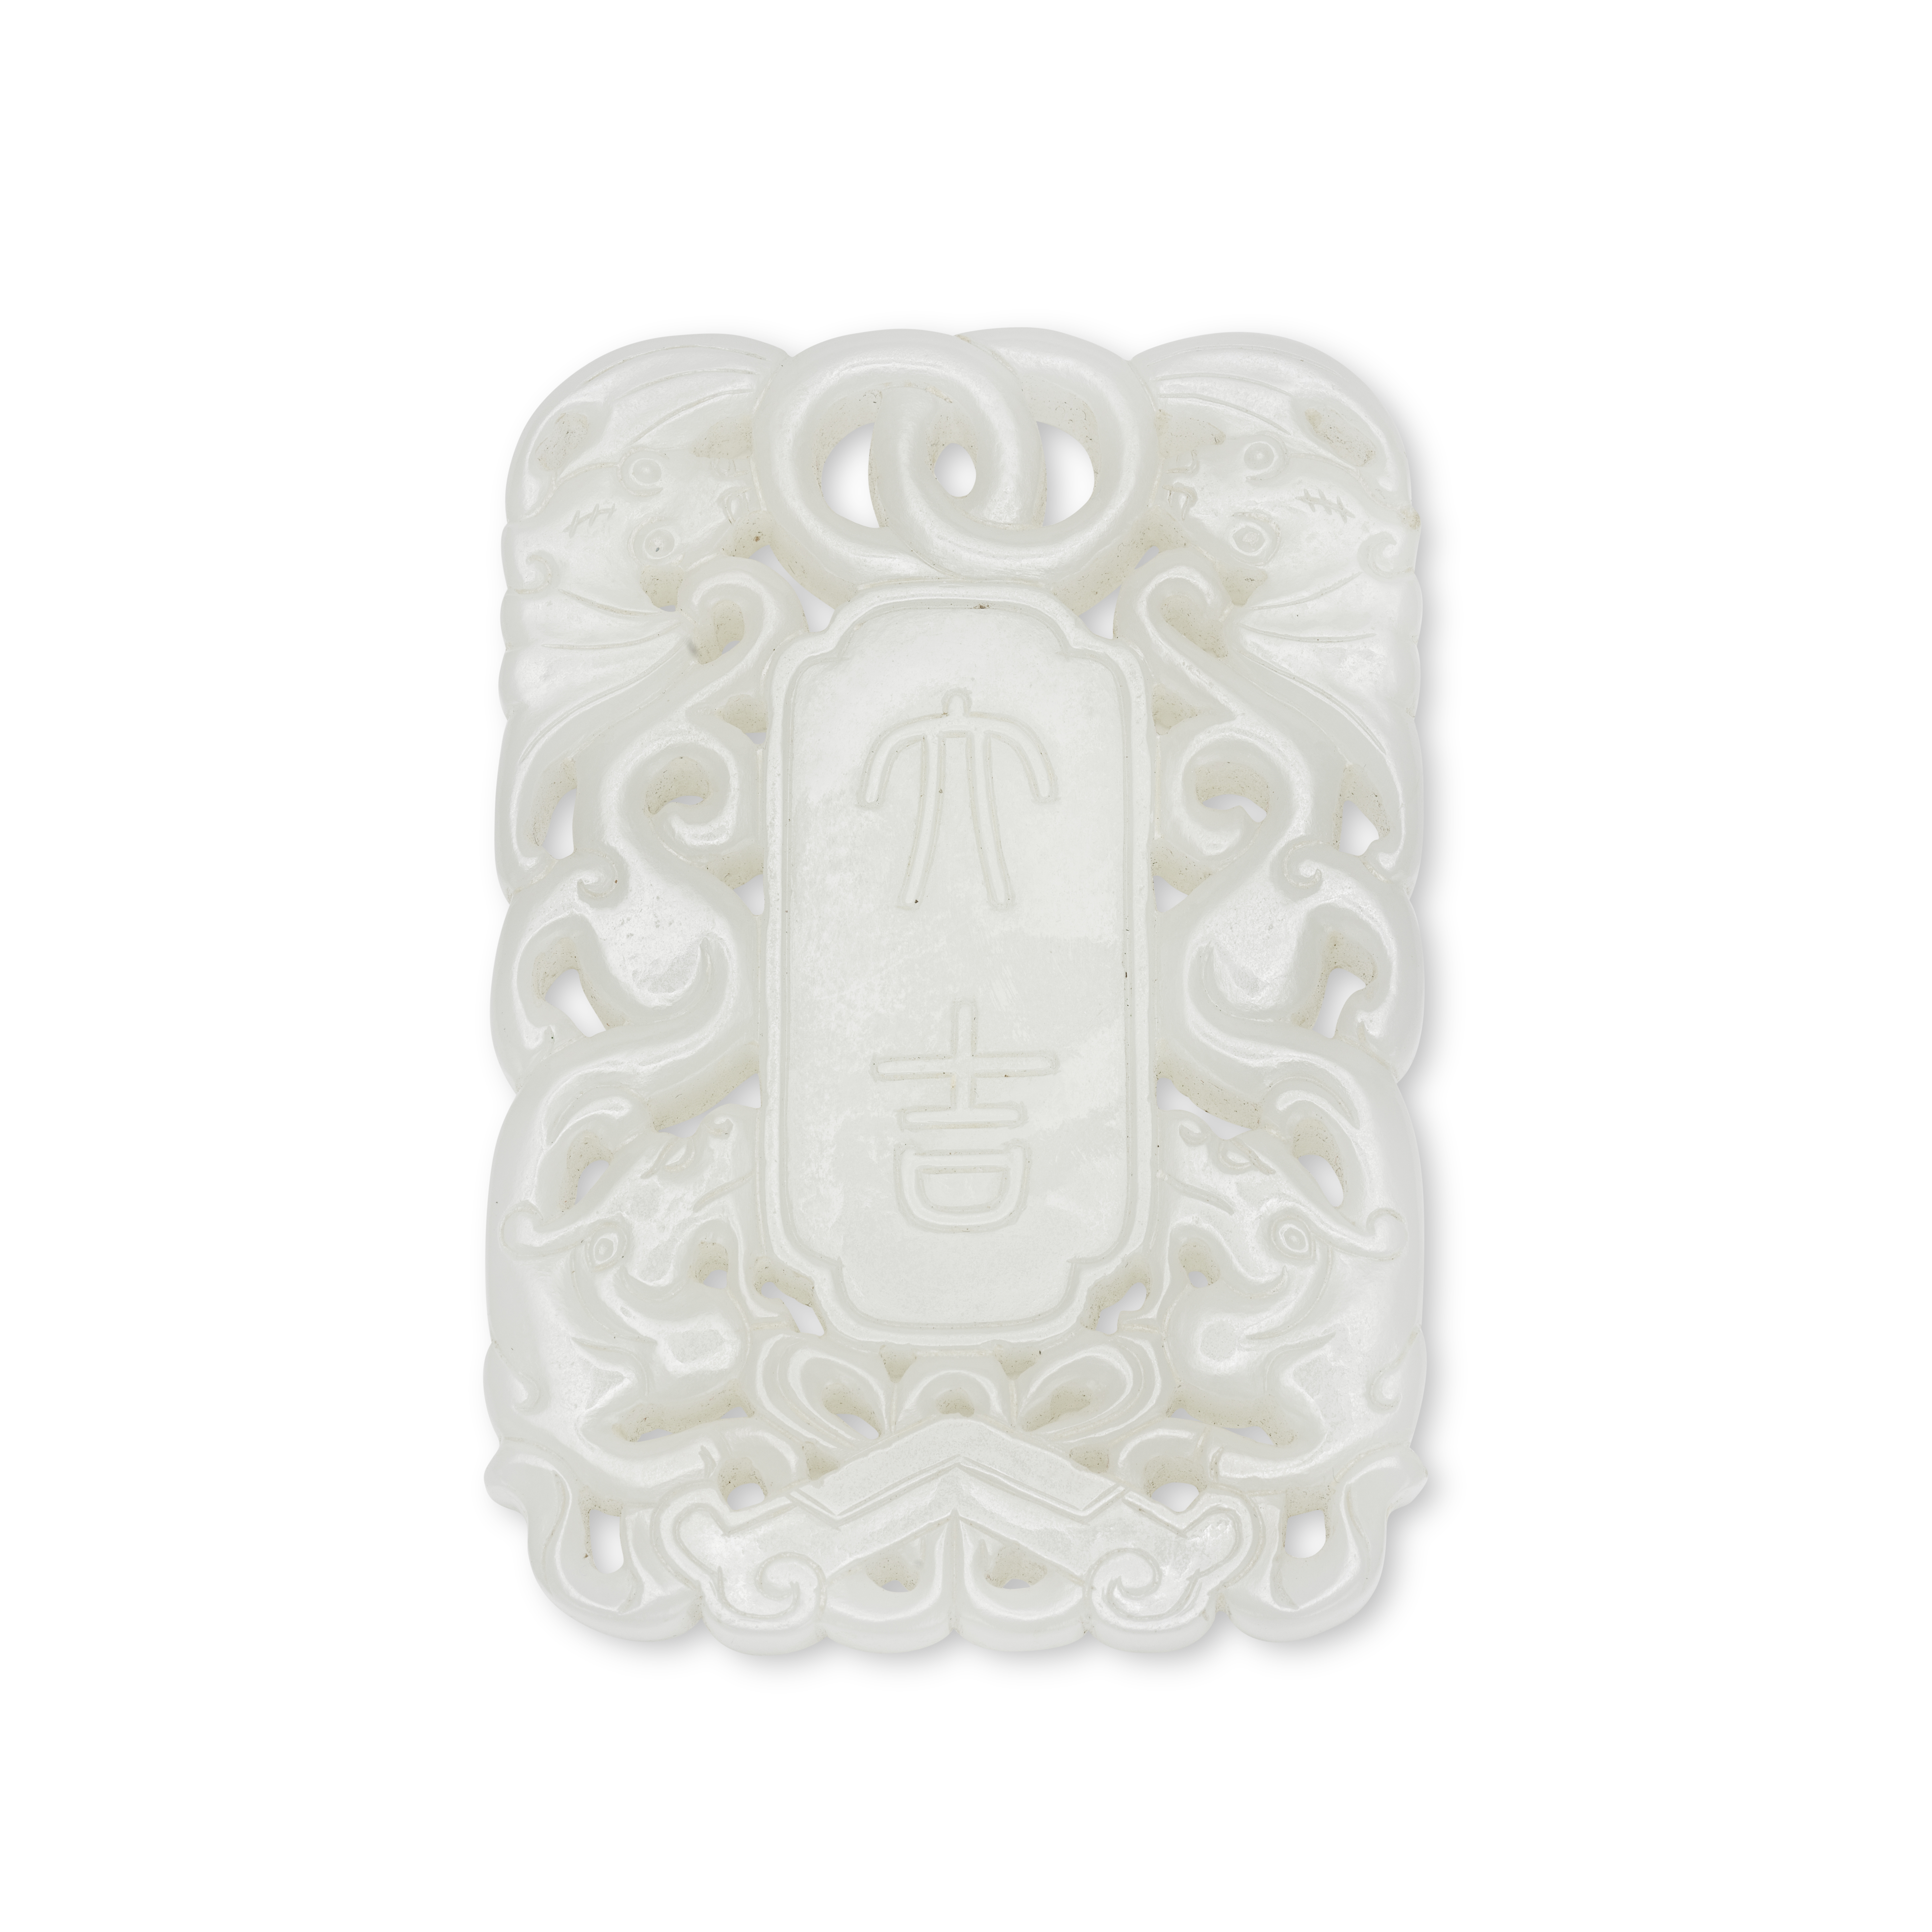 A RETICULATED WHITE JADE PLAQUE 18th/19th century